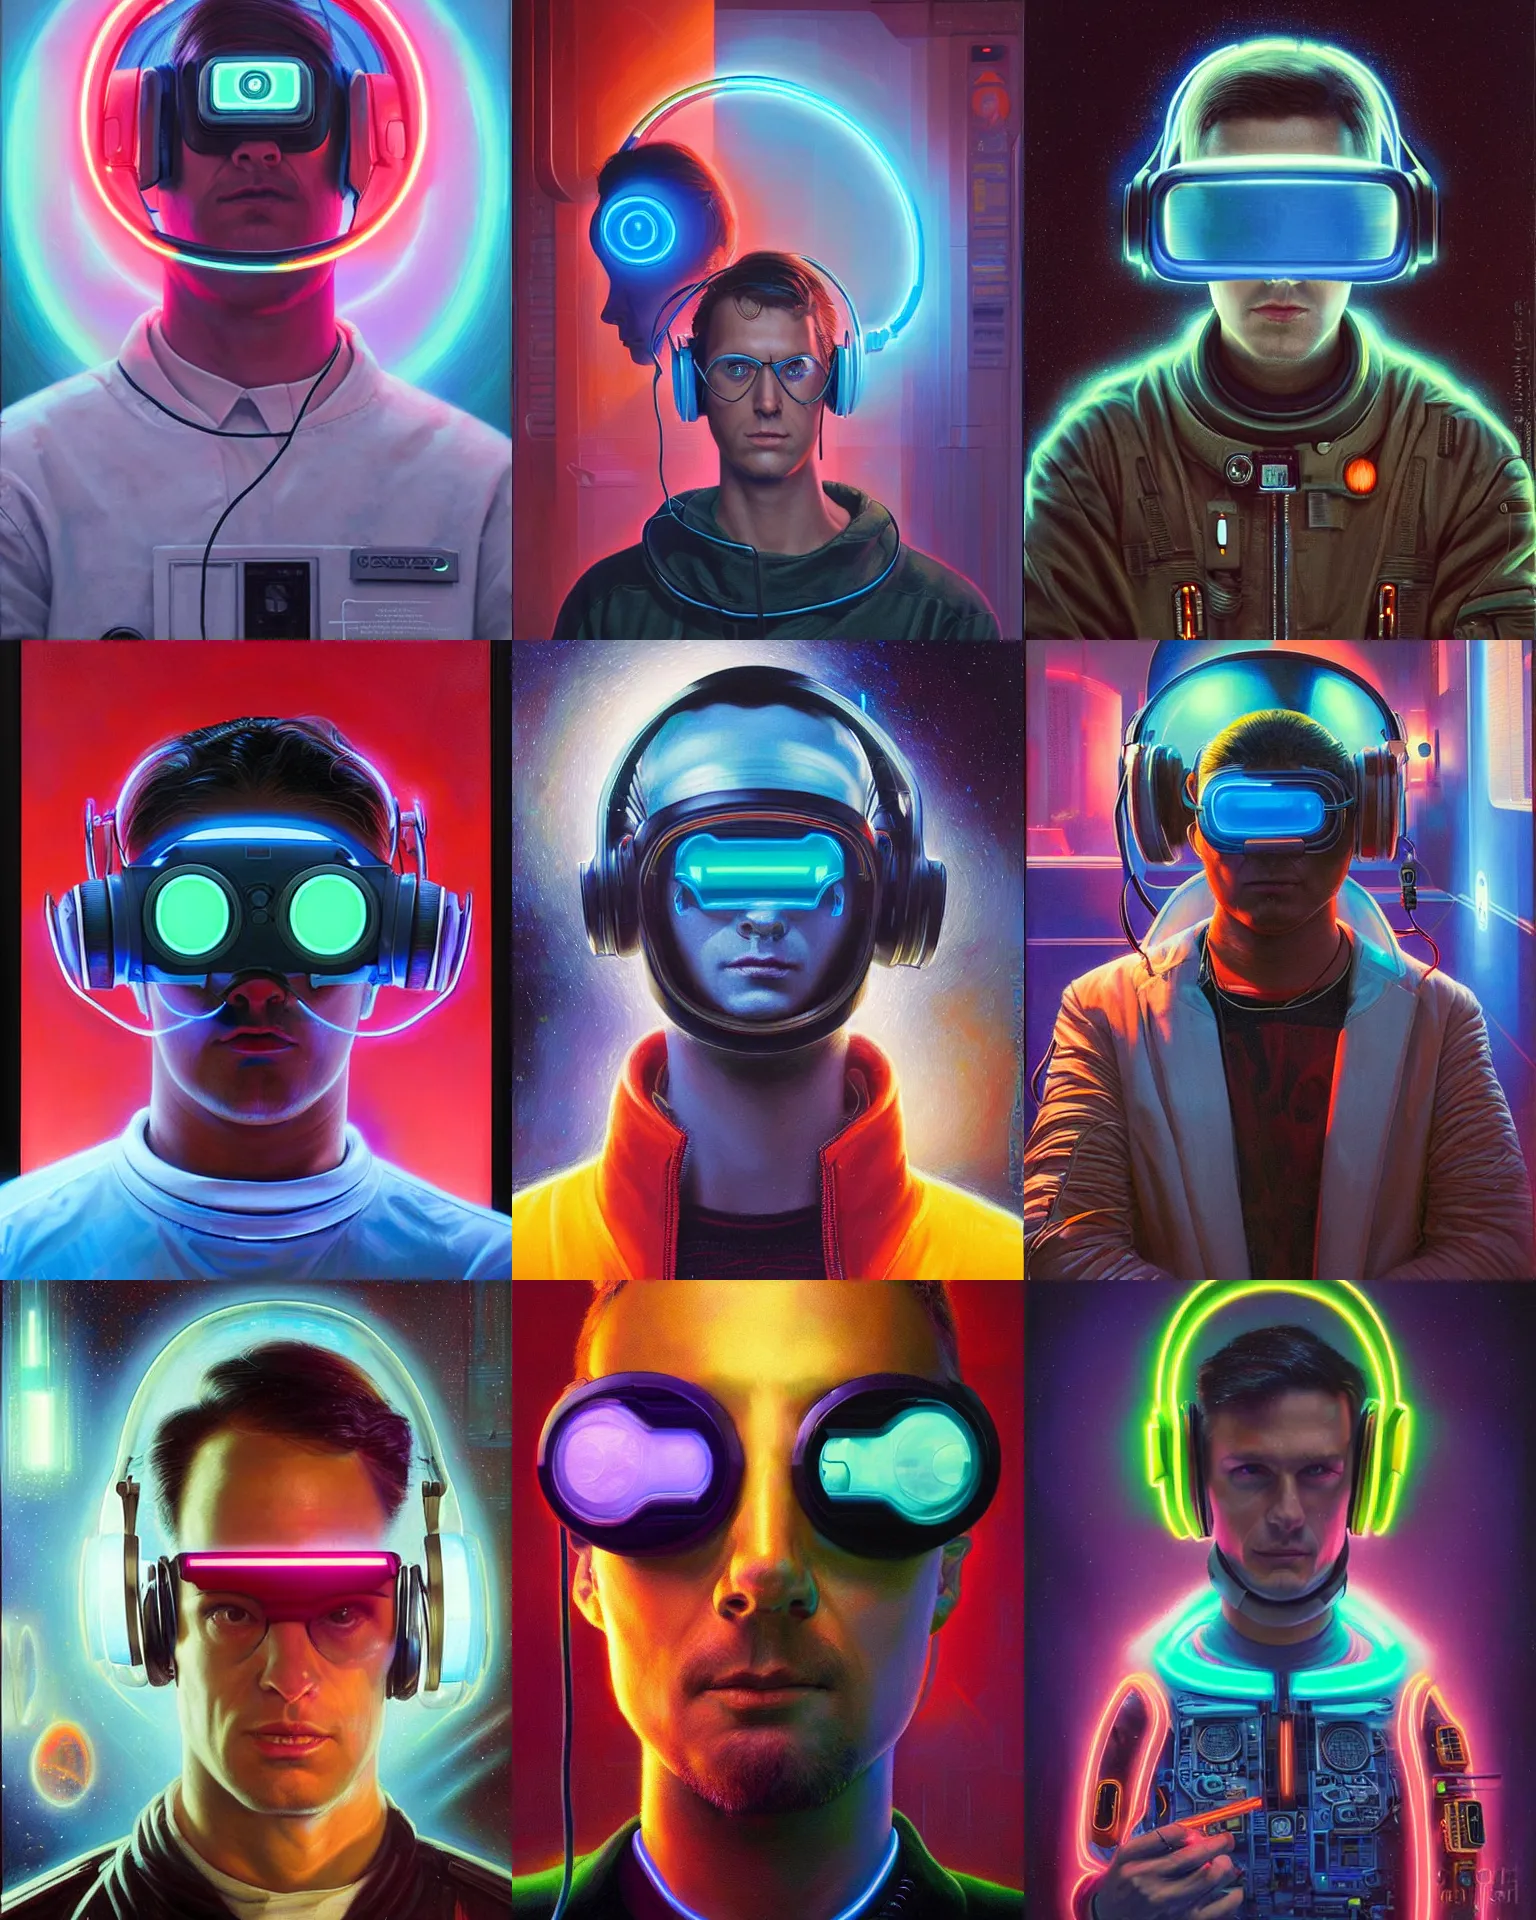 Prompt: neon cyberpunk programmer with glowing cyclops visor over eyes and sleek headphones headshot desaturated portrait painting by donato giancola, dean cornwall, rhads, tom whalen, alex grey astronaut fashion photography